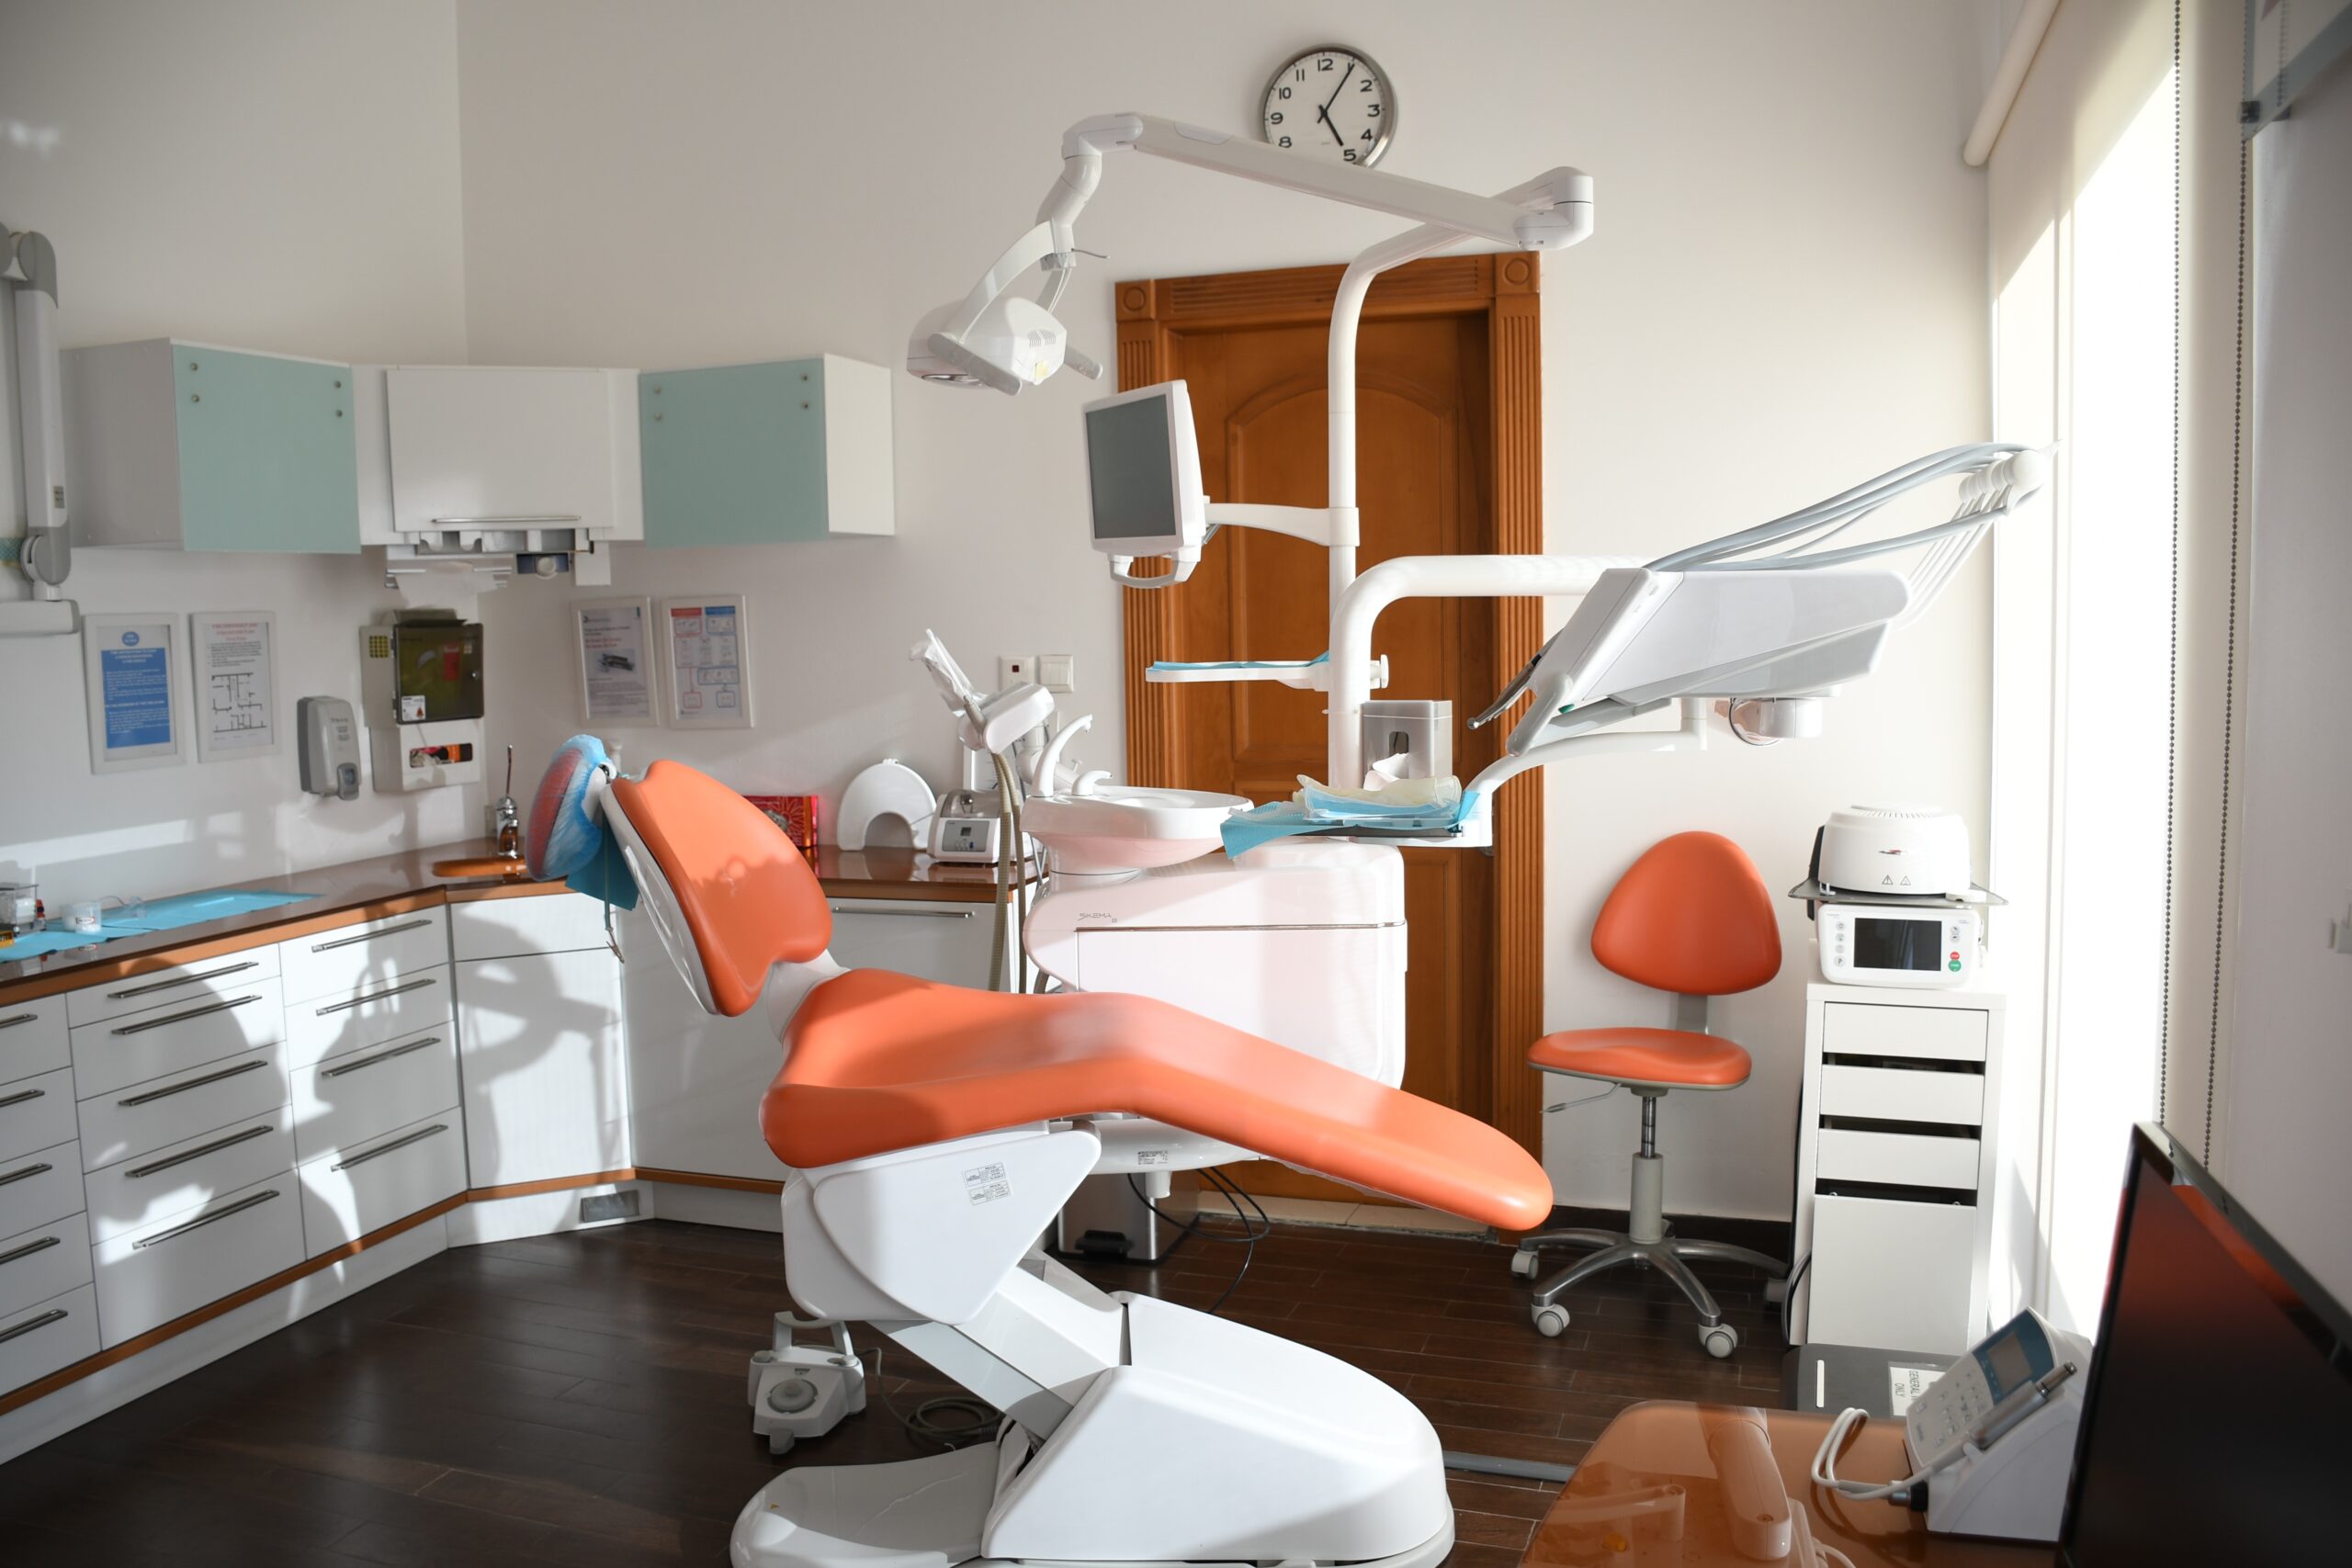 
Commercial Cleaning Company for Dentists